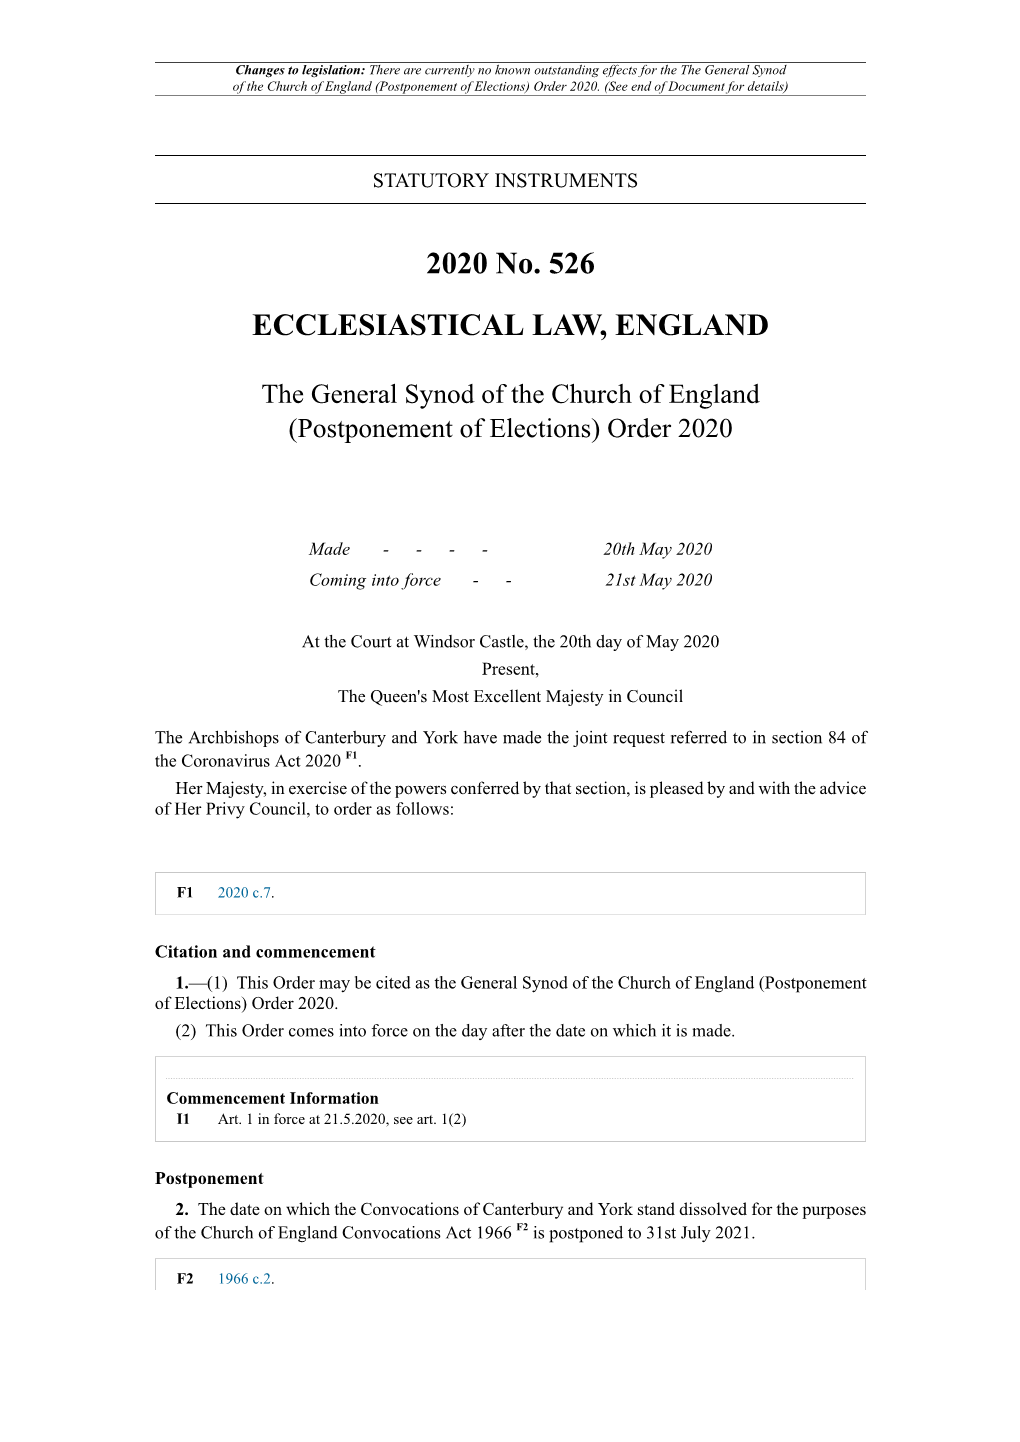 The General Synod of the Church of England (Postponement of Elections) Order 2020